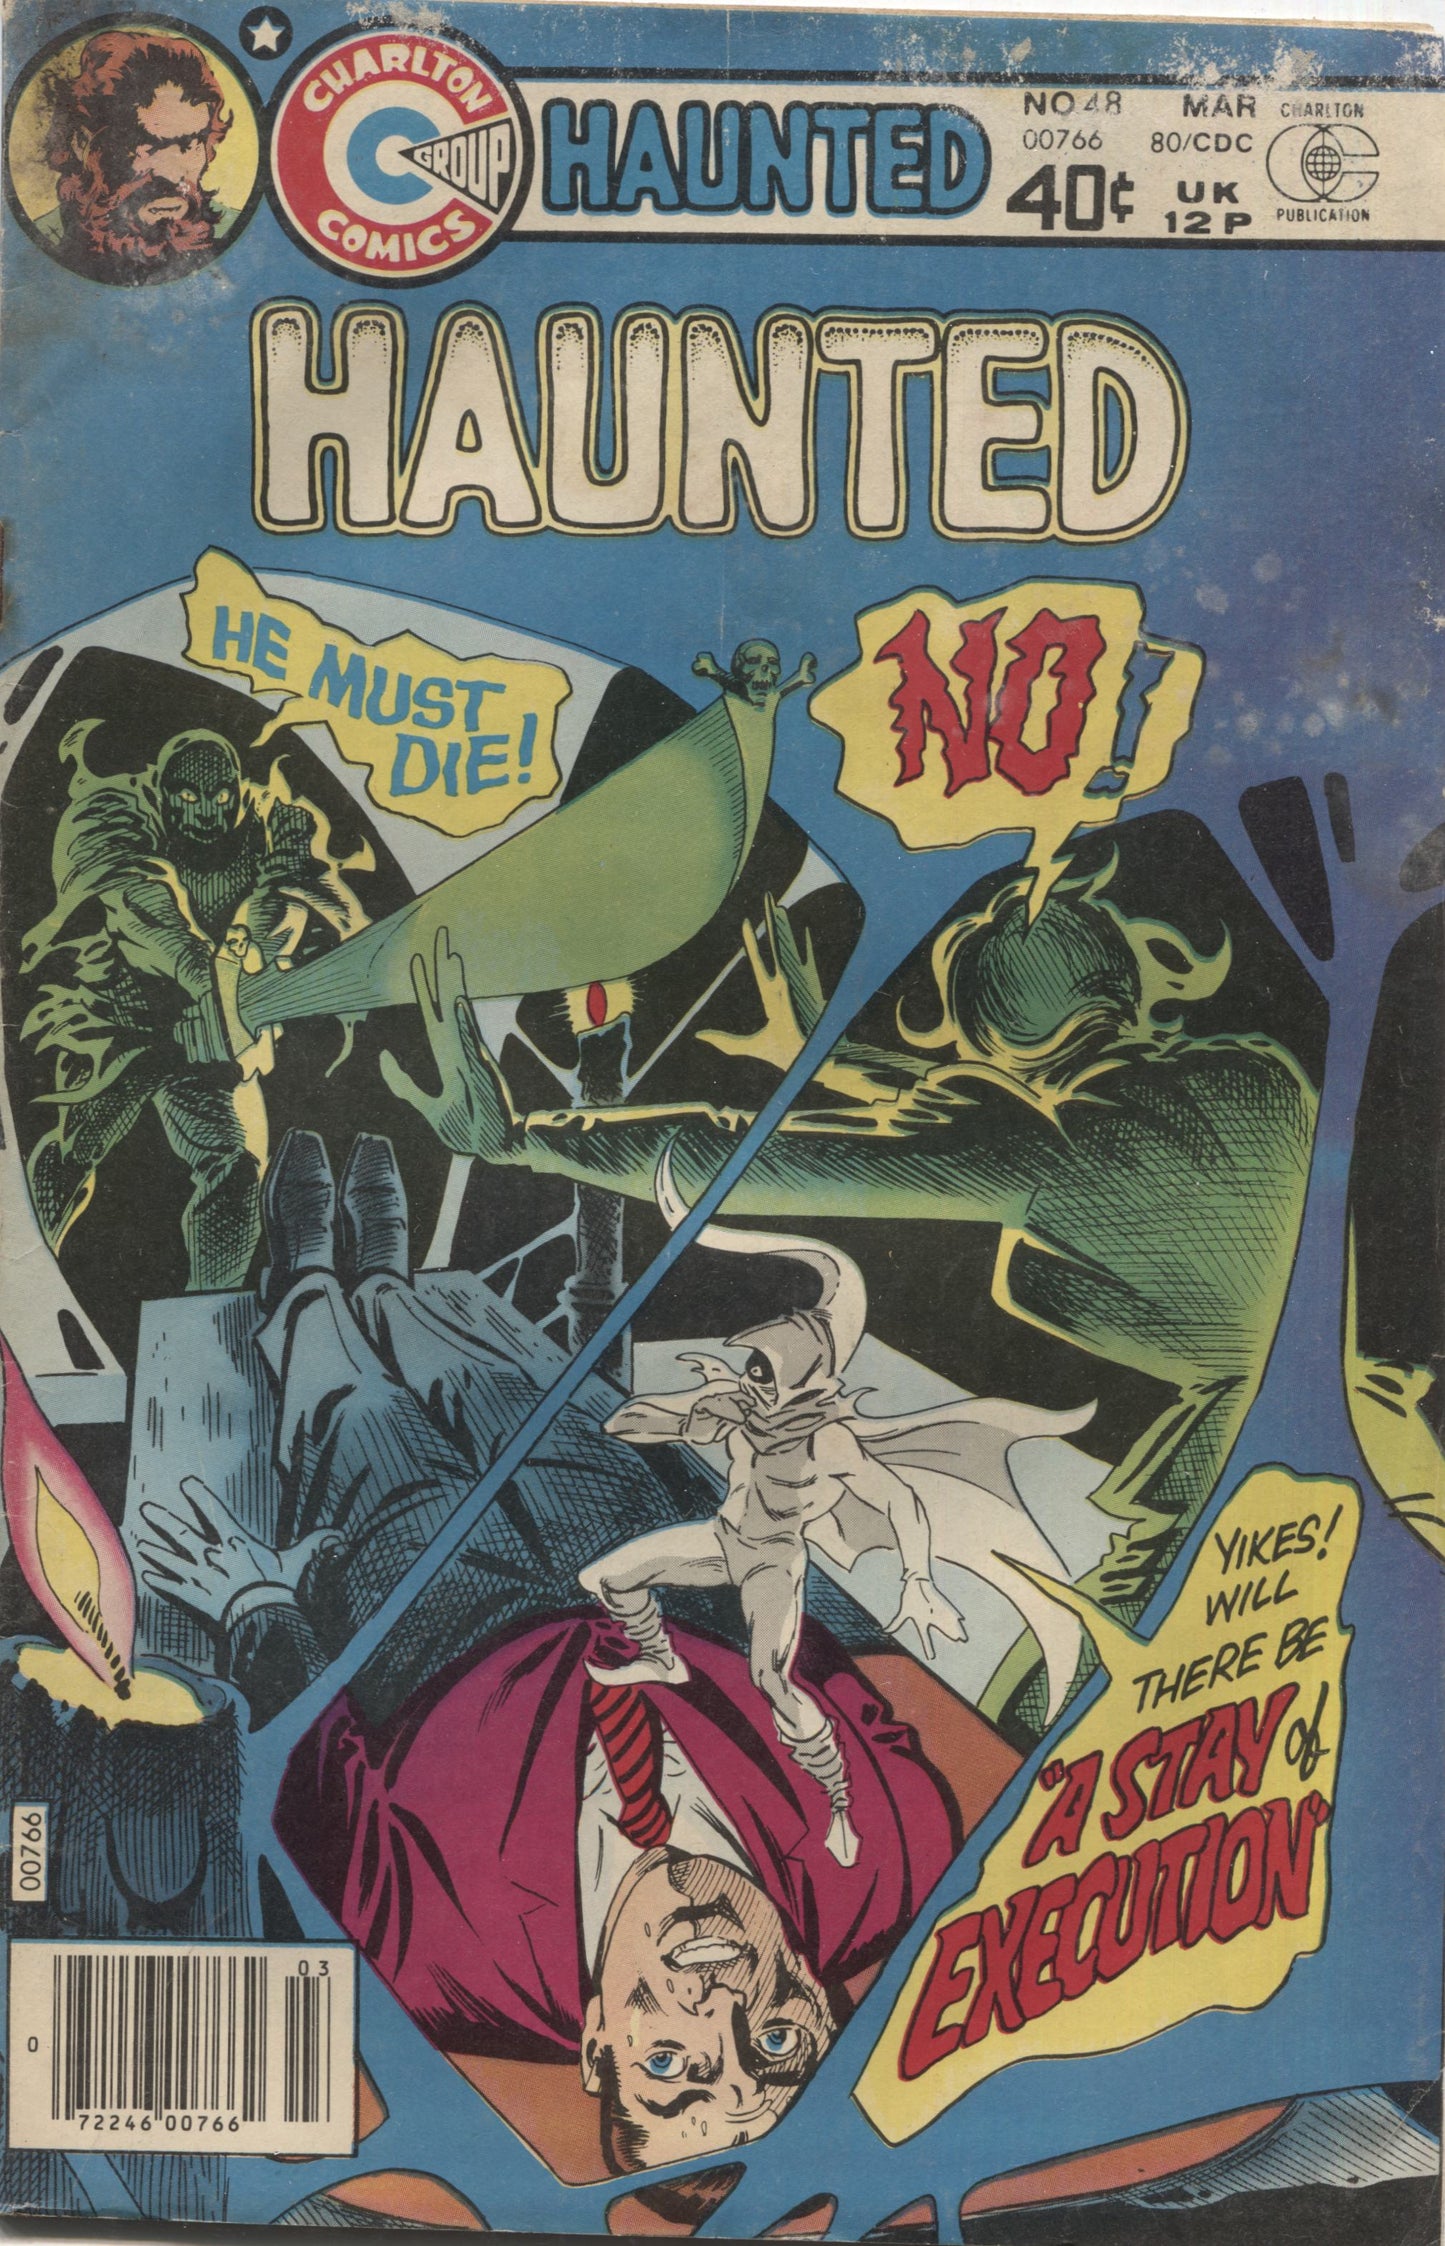 Haunted No. 48, "A Stay of Execution," Charlton Comics, March 1980